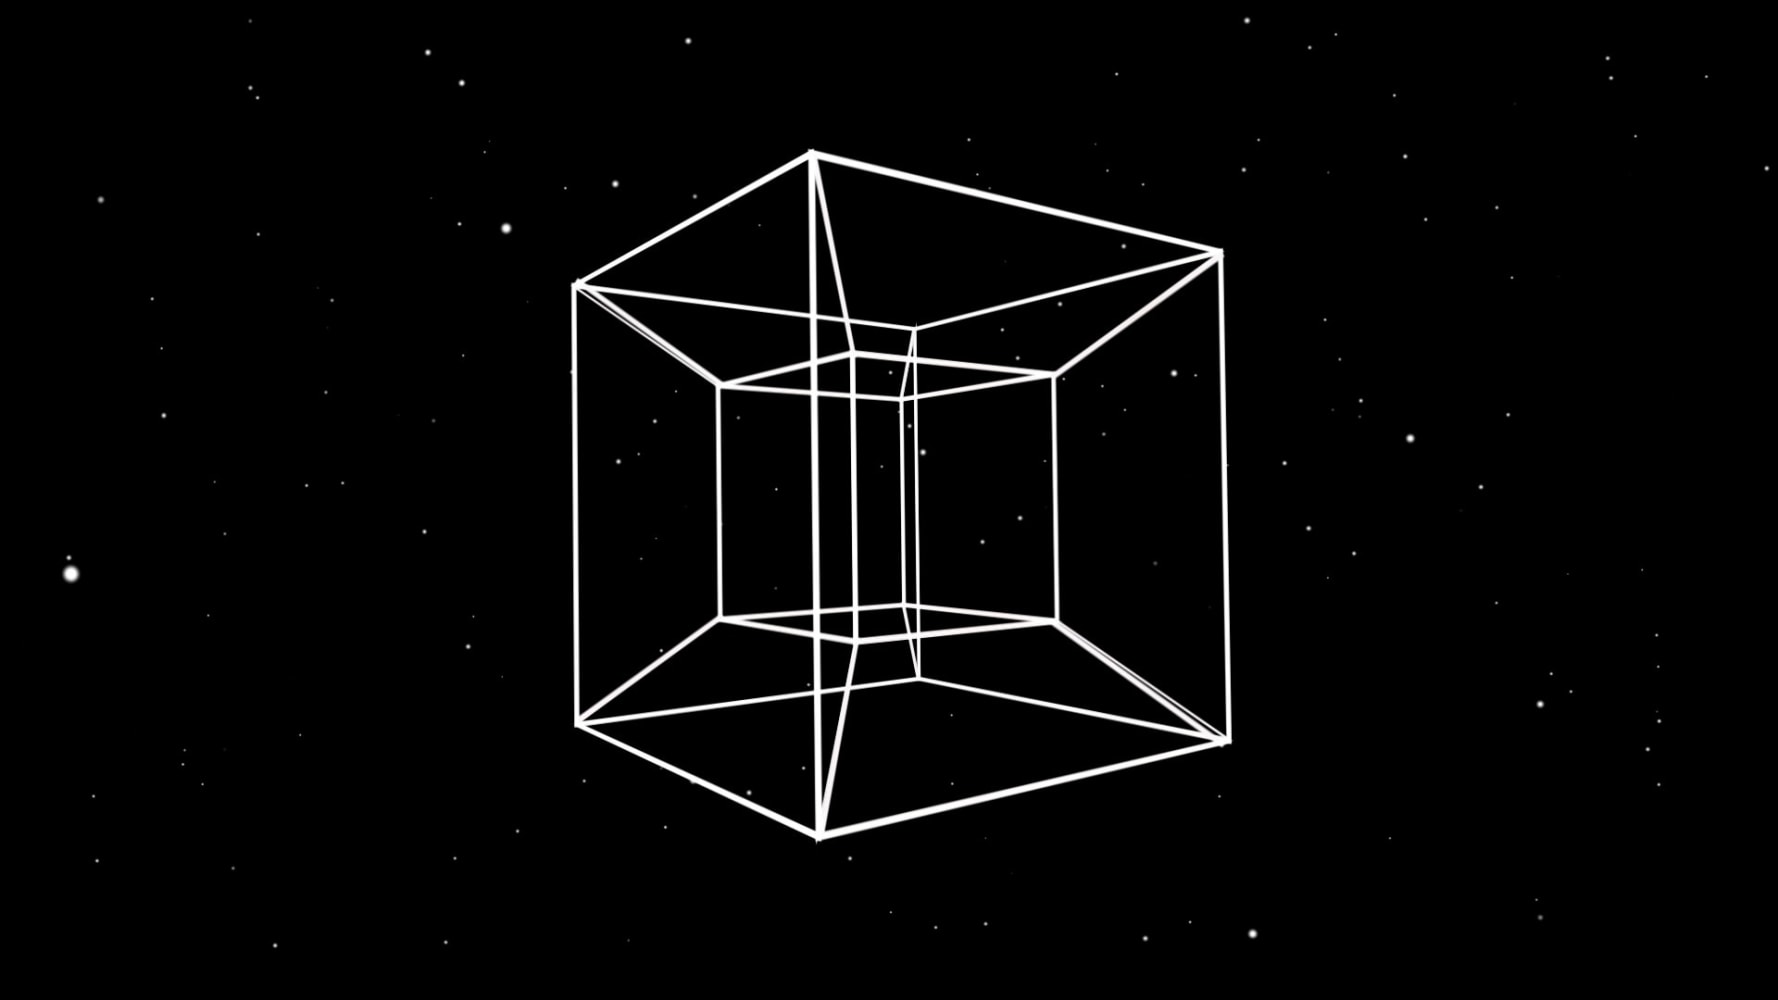 Charles Atlas
Tesseract ▢, 2017
Stereoscopic 3D video (two digital files)
Duration: 42 minutes